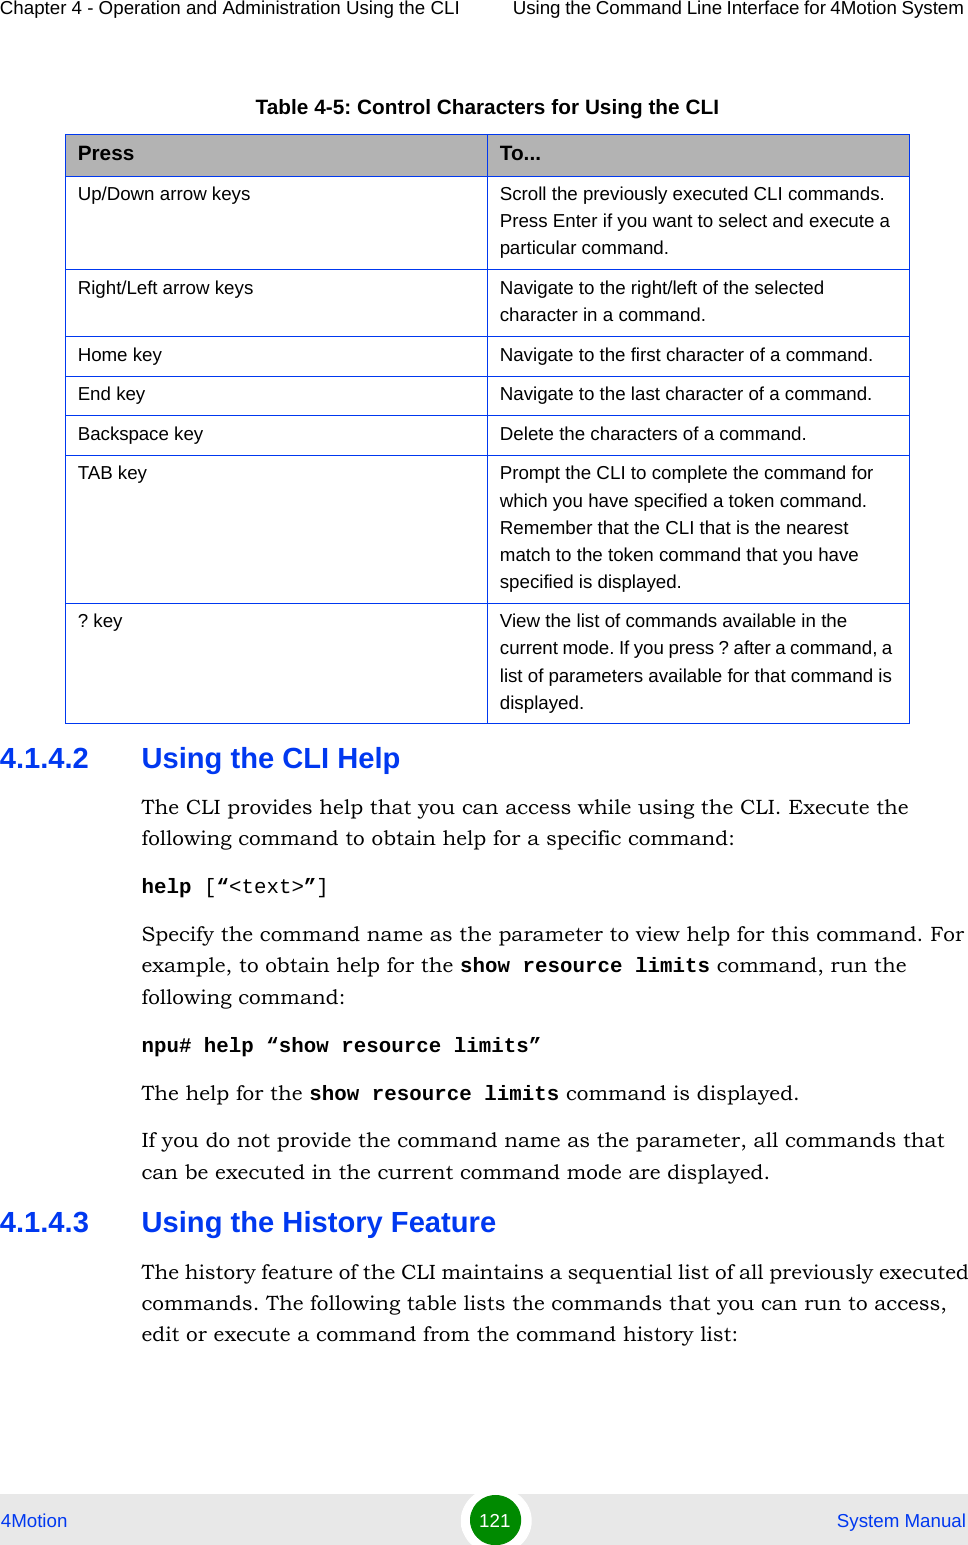 Chapter 4 - Operation and Administration Using the CLI Using the Command Line Interface for 4Motion System 4Motion 121  System Manual4.1.4.2 Using the CLI HelpThe CLI provides help that you can access while using the CLI. Execute the following command to obtain help for a specific command:help [“&lt;text&gt;”]Specify the command name as the parameter to view help for this command. For example, to obtain help for the show resource limits command, run the following command:npu# help “show resource limits”The help for the show resource limits command is displayed. If you do not provide the command name as the parameter, all commands that can be executed in the current command mode are displayed.4.1.4.3 Using the History FeatureThe history feature of the CLI maintains a sequential list of all previously executed commands. The following table lists the commands that you can run to access, edit or execute a command from the command history list:Table 4-5: Control Characters for Using the CLIPress To...Up/Down arrow keys Scroll the previously executed CLI commands. Press Enter if you want to select and execute a particular command.Right/Left arrow keys Navigate to the right/left of the selected character in a command.Home key Navigate to the first character of a command.End key Navigate to the last character of a command.Backspace key Delete the characters of a command.TAB key Prompt the CLI to complete the command for which you have specified a token command. Remember that the CLI that is the nearest match to the token command that you have specified is displayed.? key View the list of commands available in the current mode. If you press ? after a command, a list of parameters available for that command is displayed.